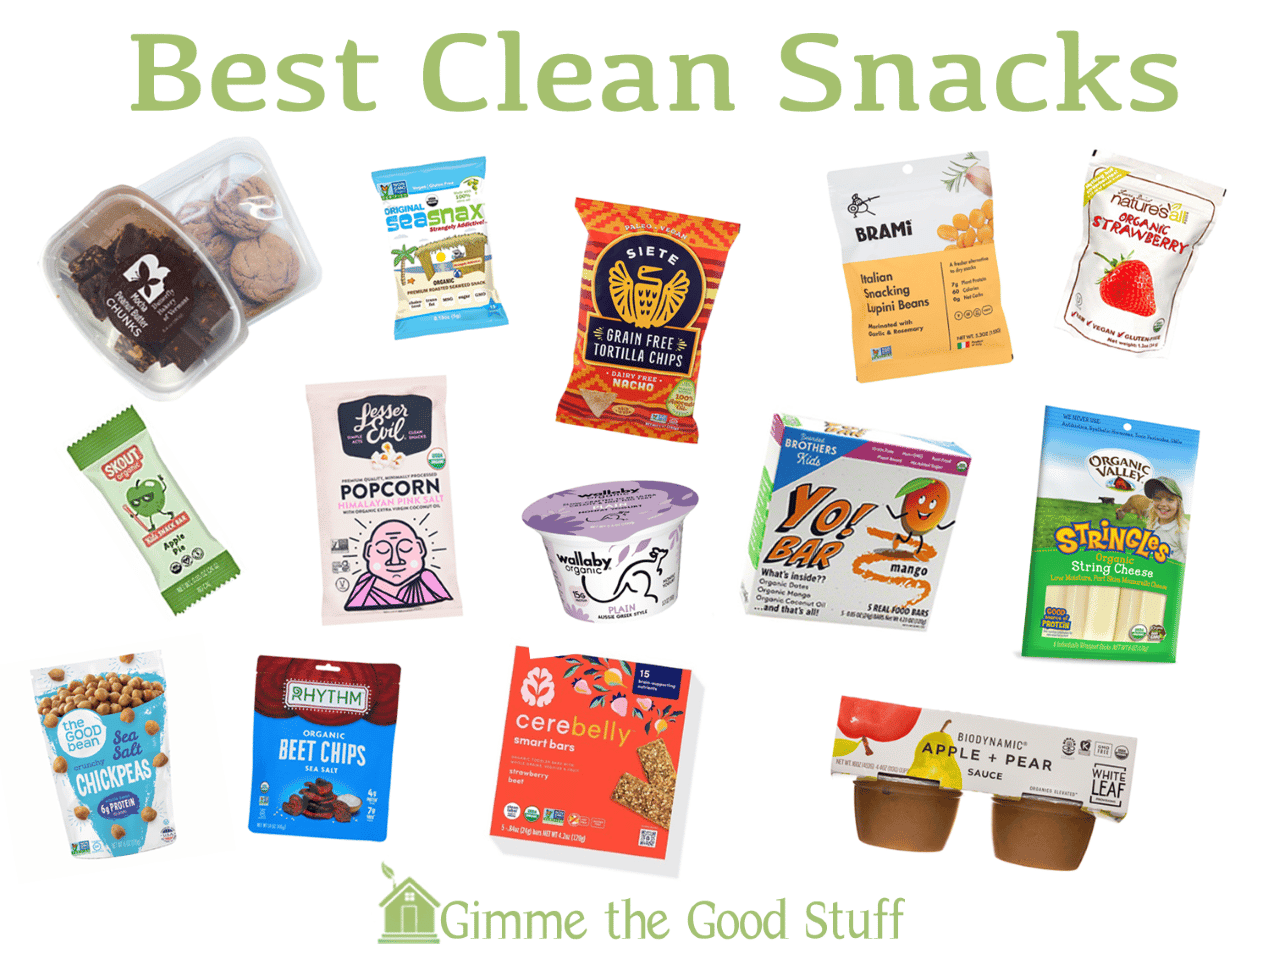 Best Clean Snacks Guide from Gimme the Good Stuff